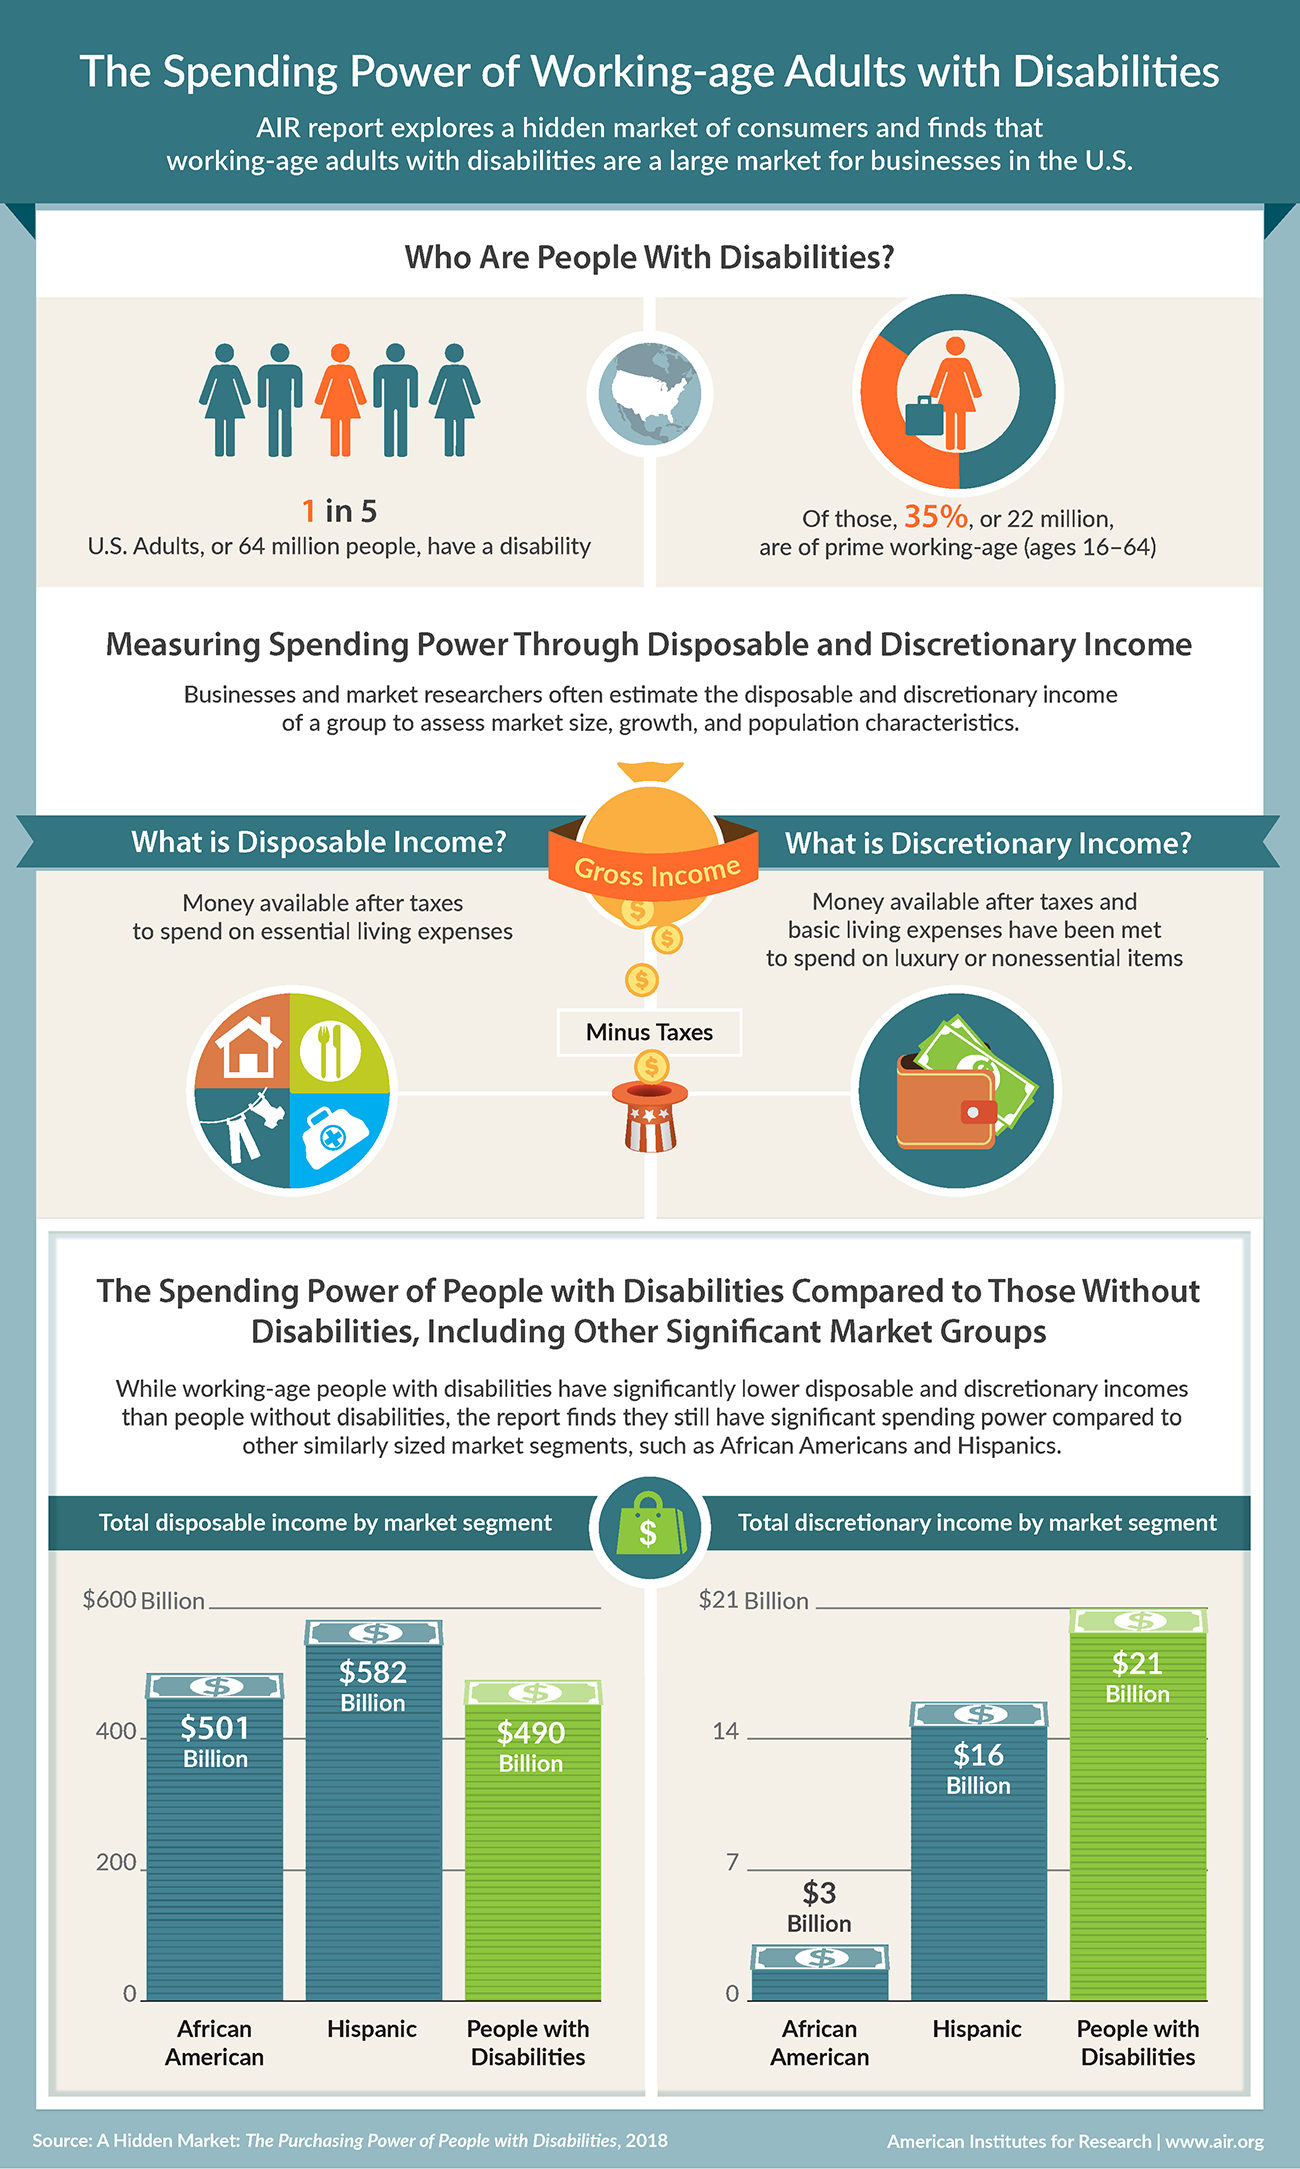 The Spending Power of Working-age Adults with Disabilities An infographic in three sections depicts the spending power of working-age adults with disabilities, who represent a large market for businesses in the United States. The top section has two panels that answers the question: Who are people with disabilities in the United States? The first panel, on the left, depicts five icon images of three women and two men. One of the icons is highlighted. This represents the fact that one in five adults in the United States, or 64 million people, have a disability. The second panel, on the right, depicts an icon image of a person carrying a briefcase. This represents the fact that of the 64 million people with a disability, 22 million, or 35 percent, of them are of prime working age, meaning that they are from ages 16 through 64. The middle section of the infographic defines the two types of income: disposable and discretionary. A panel on the left defines disposable income as money available after taxes to spend on essential living expenses. Such expenses include housing, food, clothing, and medical costs, represented by images of a house, spoon and fork, clothes hanging on a line outdoors, and a doctor’s briefcase. A panel on the right defines discretionary income as money available after taxes and basic living expenses have been met to spend on luxury or nonessential items. It depicts an image of a wallet filled with dollar bills. The bottom section compares the spending power of people with disabilities to those without disabilities in other significant market groups. It shows that while working-age people with disabilities have significantly lower disposable and discretionary incomes than people without disabilities, they still have significant spending power compared to other similarly sized market segments, such as African Americans and Hispanics. The section has two panels. The panel on the left shows a vertical bar chart that compares total disposable income for African Americans, Hispanics, and people with disabilities. It shows that African Americans have 501 billion dollars in disposable income, Hispanics have 582 billion dollars, and people with disabilities have 490 billion dollars. The panel on the right shows a vertical bar chart that compares total discretionary income for African Americans, Hispanics, and people with disabilities. It shows that African Americans have 3 billion dollars in discretionary income and Hispanics have 16 billion dollars, while people with disabilities have 21 billion in discretionary income. The Source of the infographic: A Hidden Market: The Purchasing Power of People with Disabilities, 2018. The American Institutes for Research, www. a i r. org